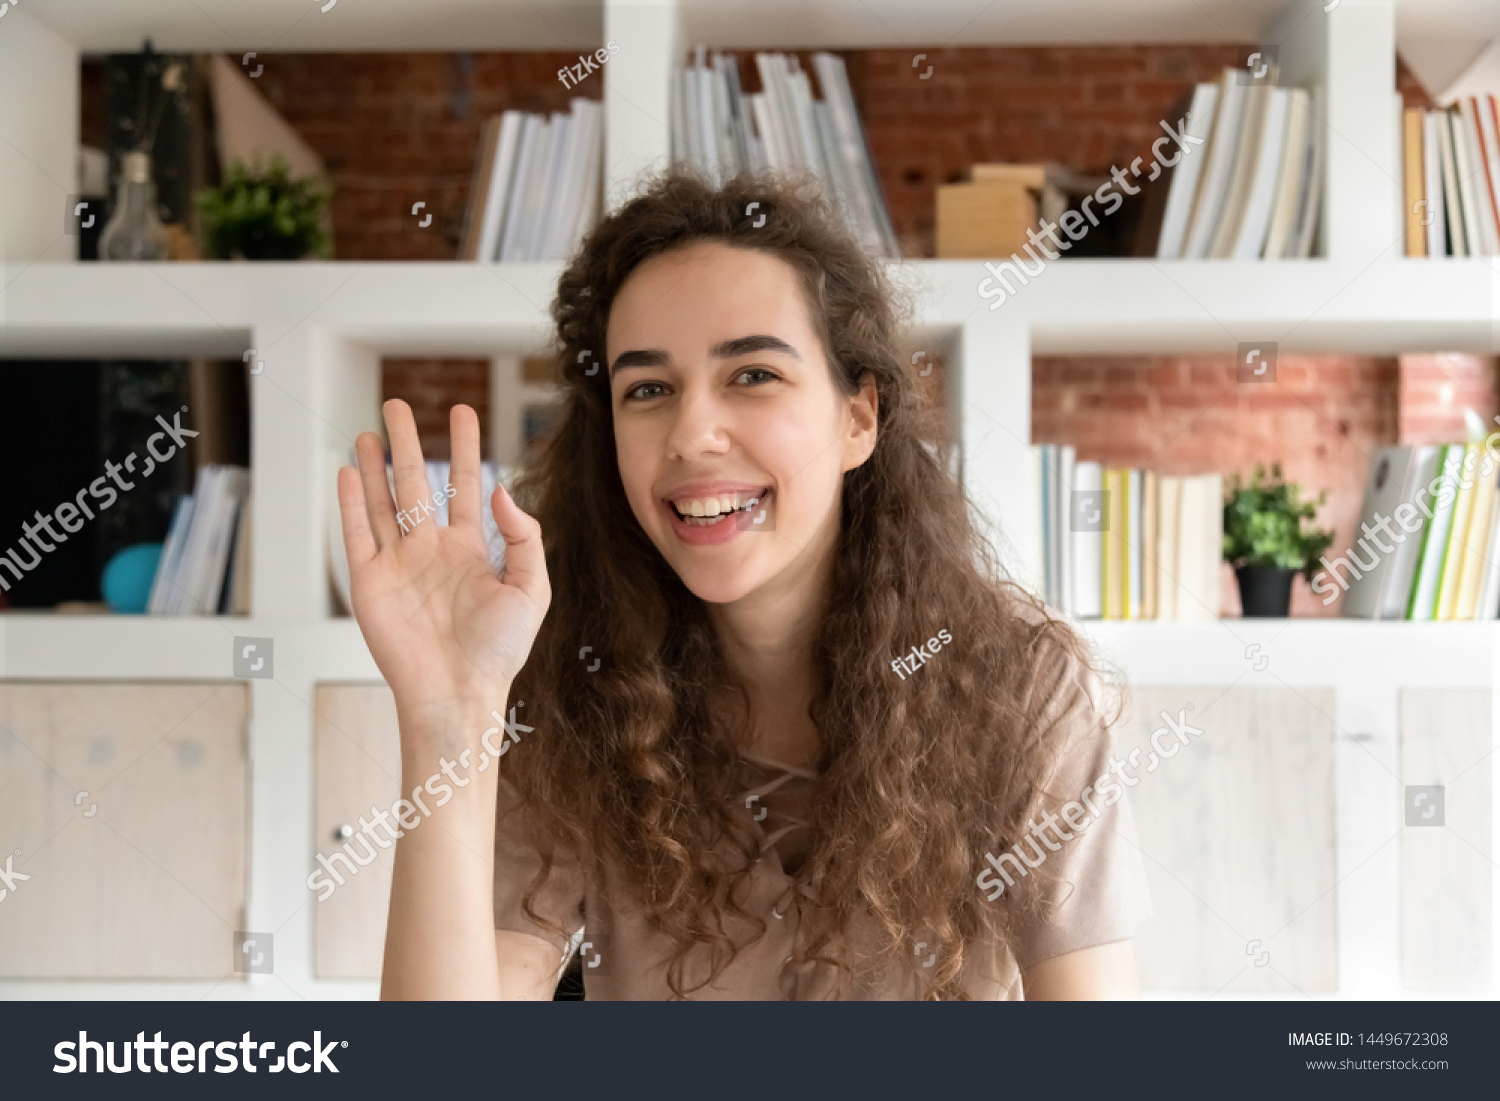 Head shot portrait smiling woman, online teacher waving hand, greeting in distance job interview, looking at camera, using webcam, teenage girl making video call, female vlogger recording vlog #1449672308